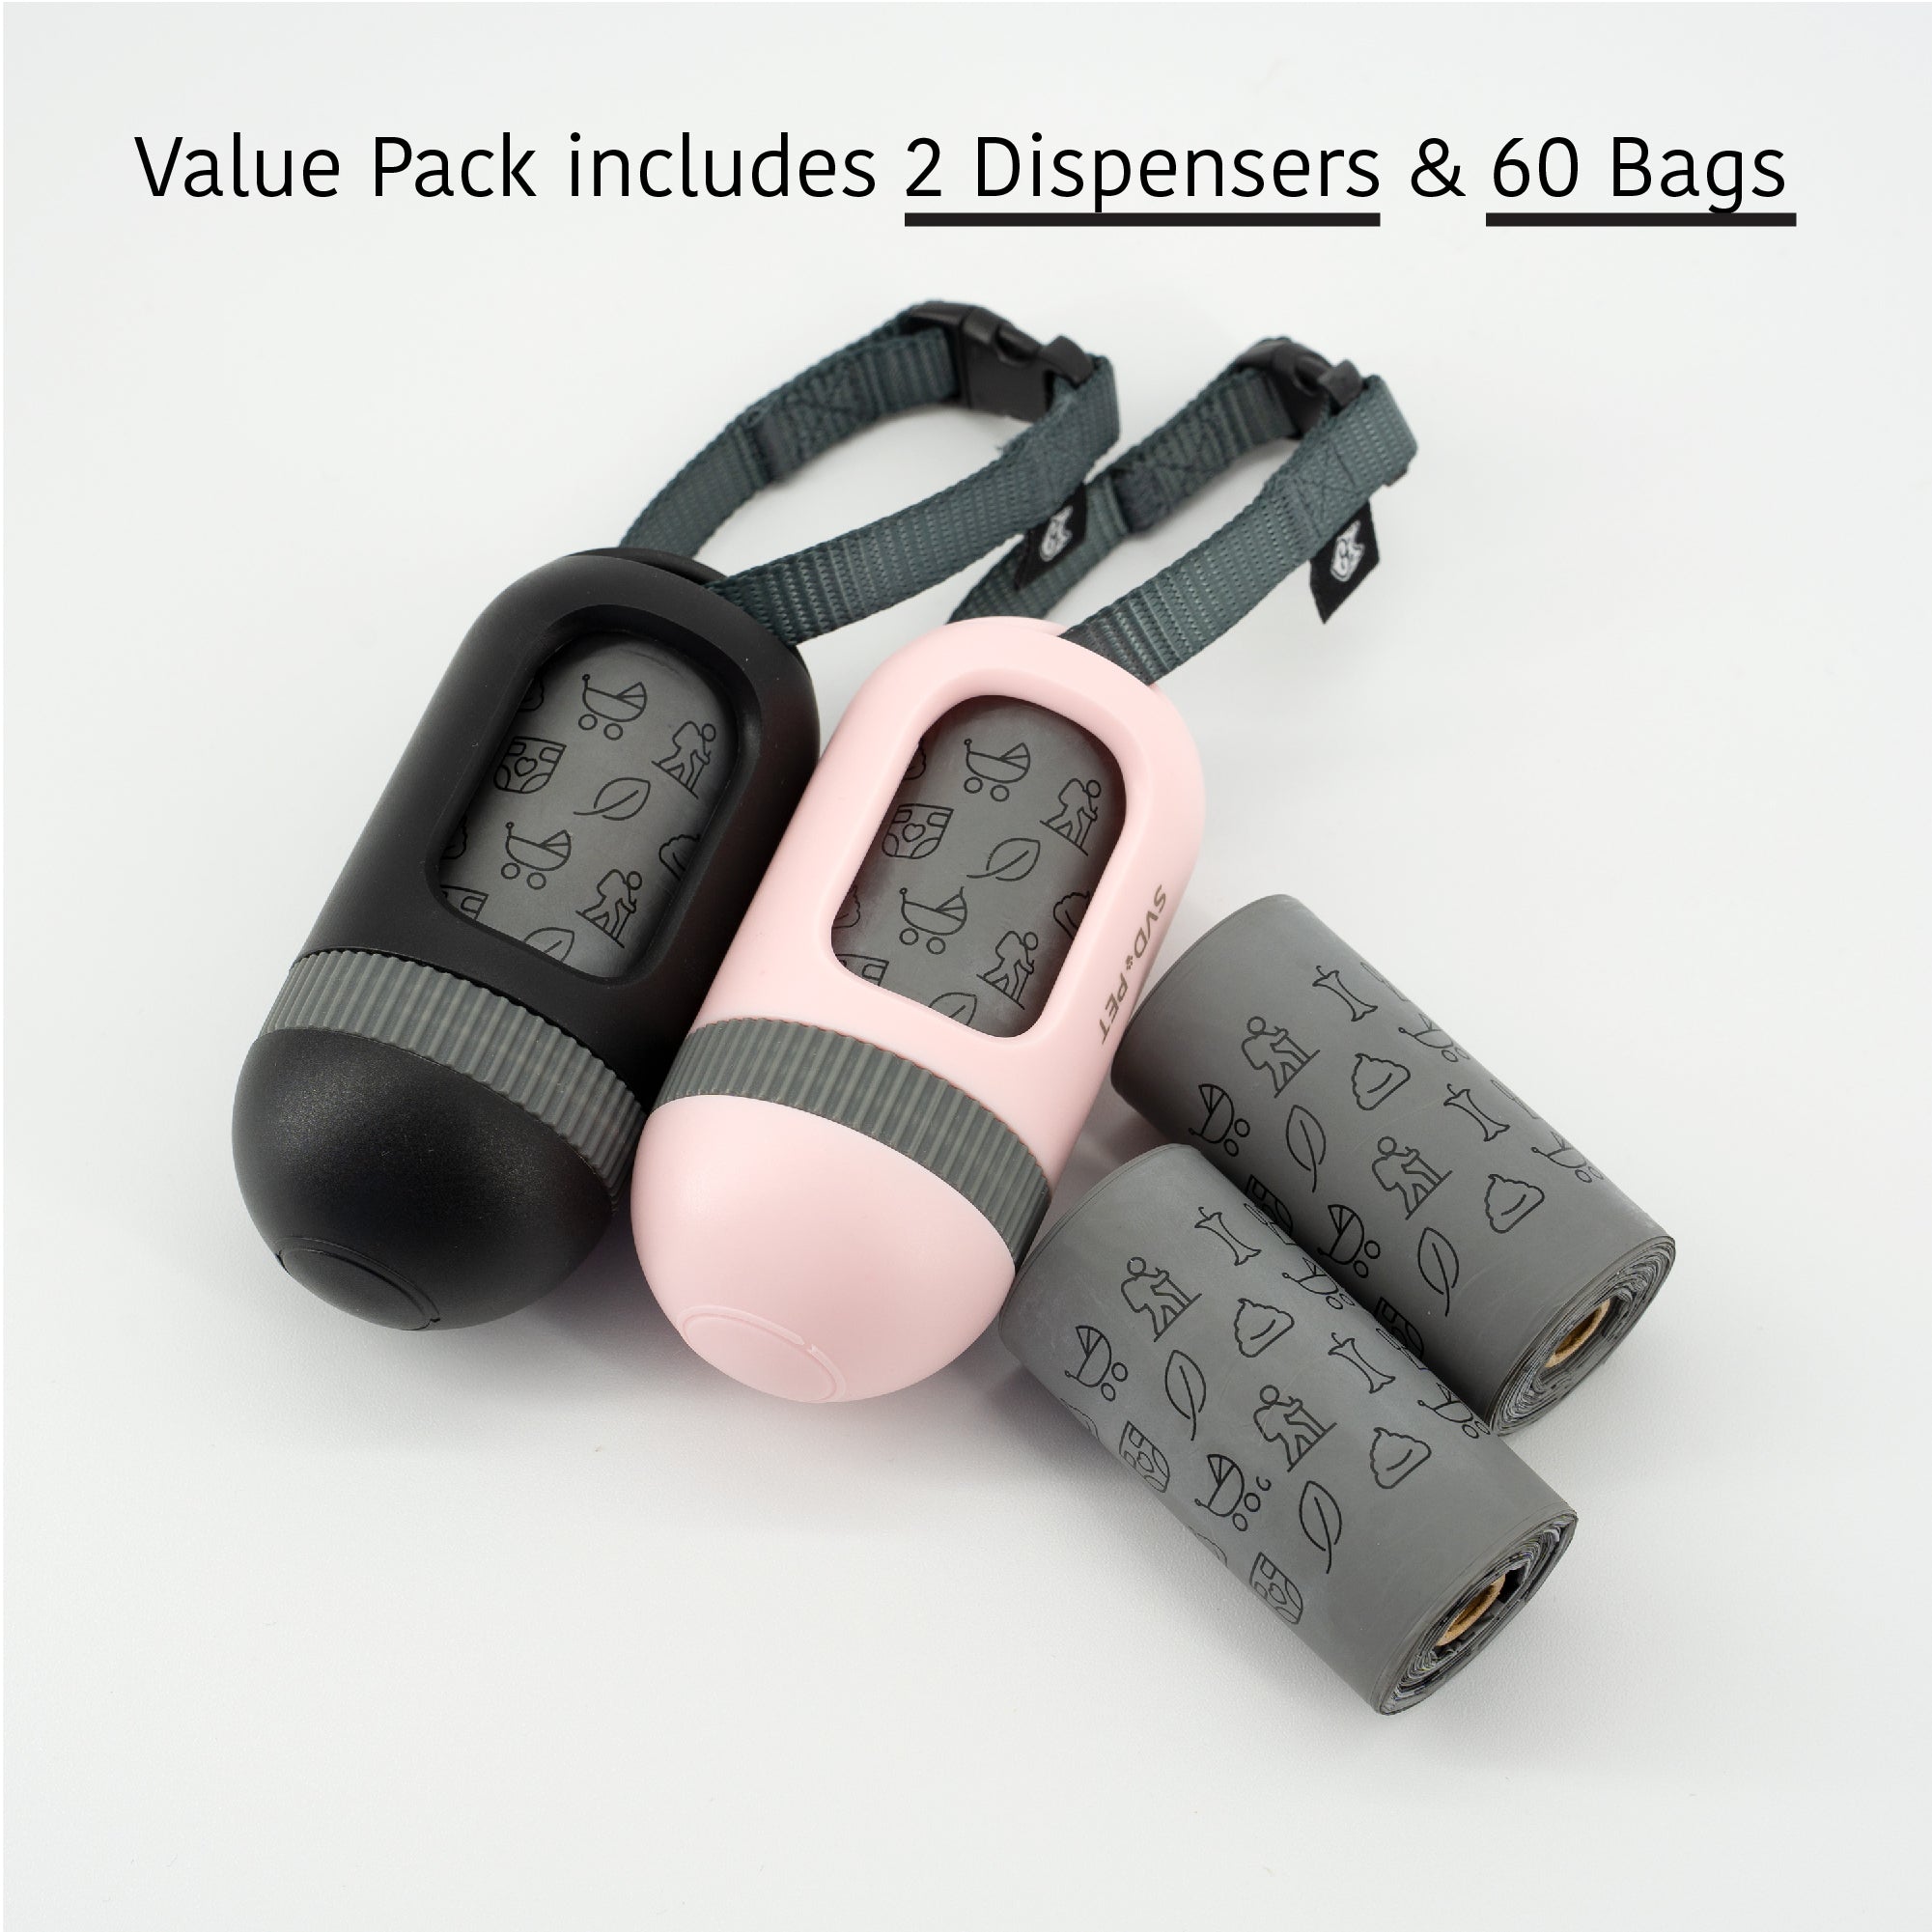 Waste Bags and Dispensers Value Pack